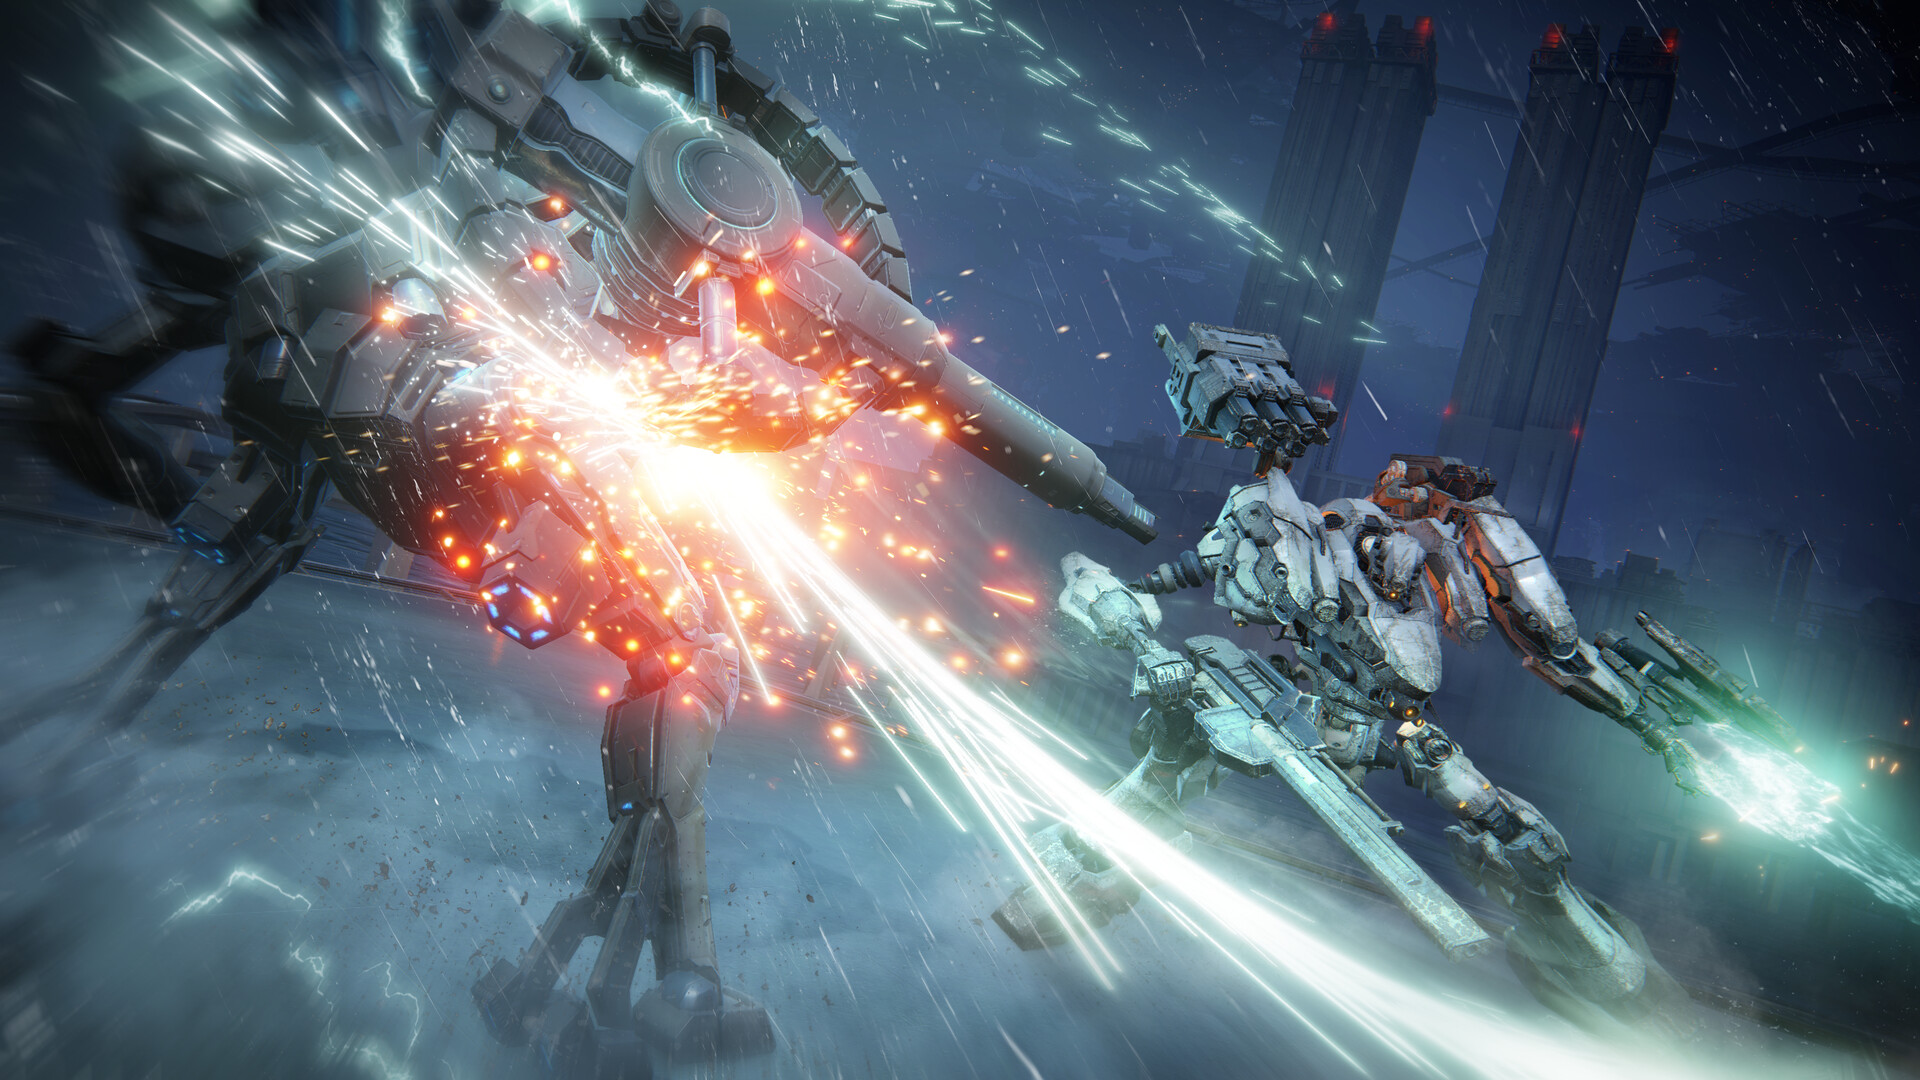 A gameplay screenshot of Armored Core 6: Fires of Rubicon